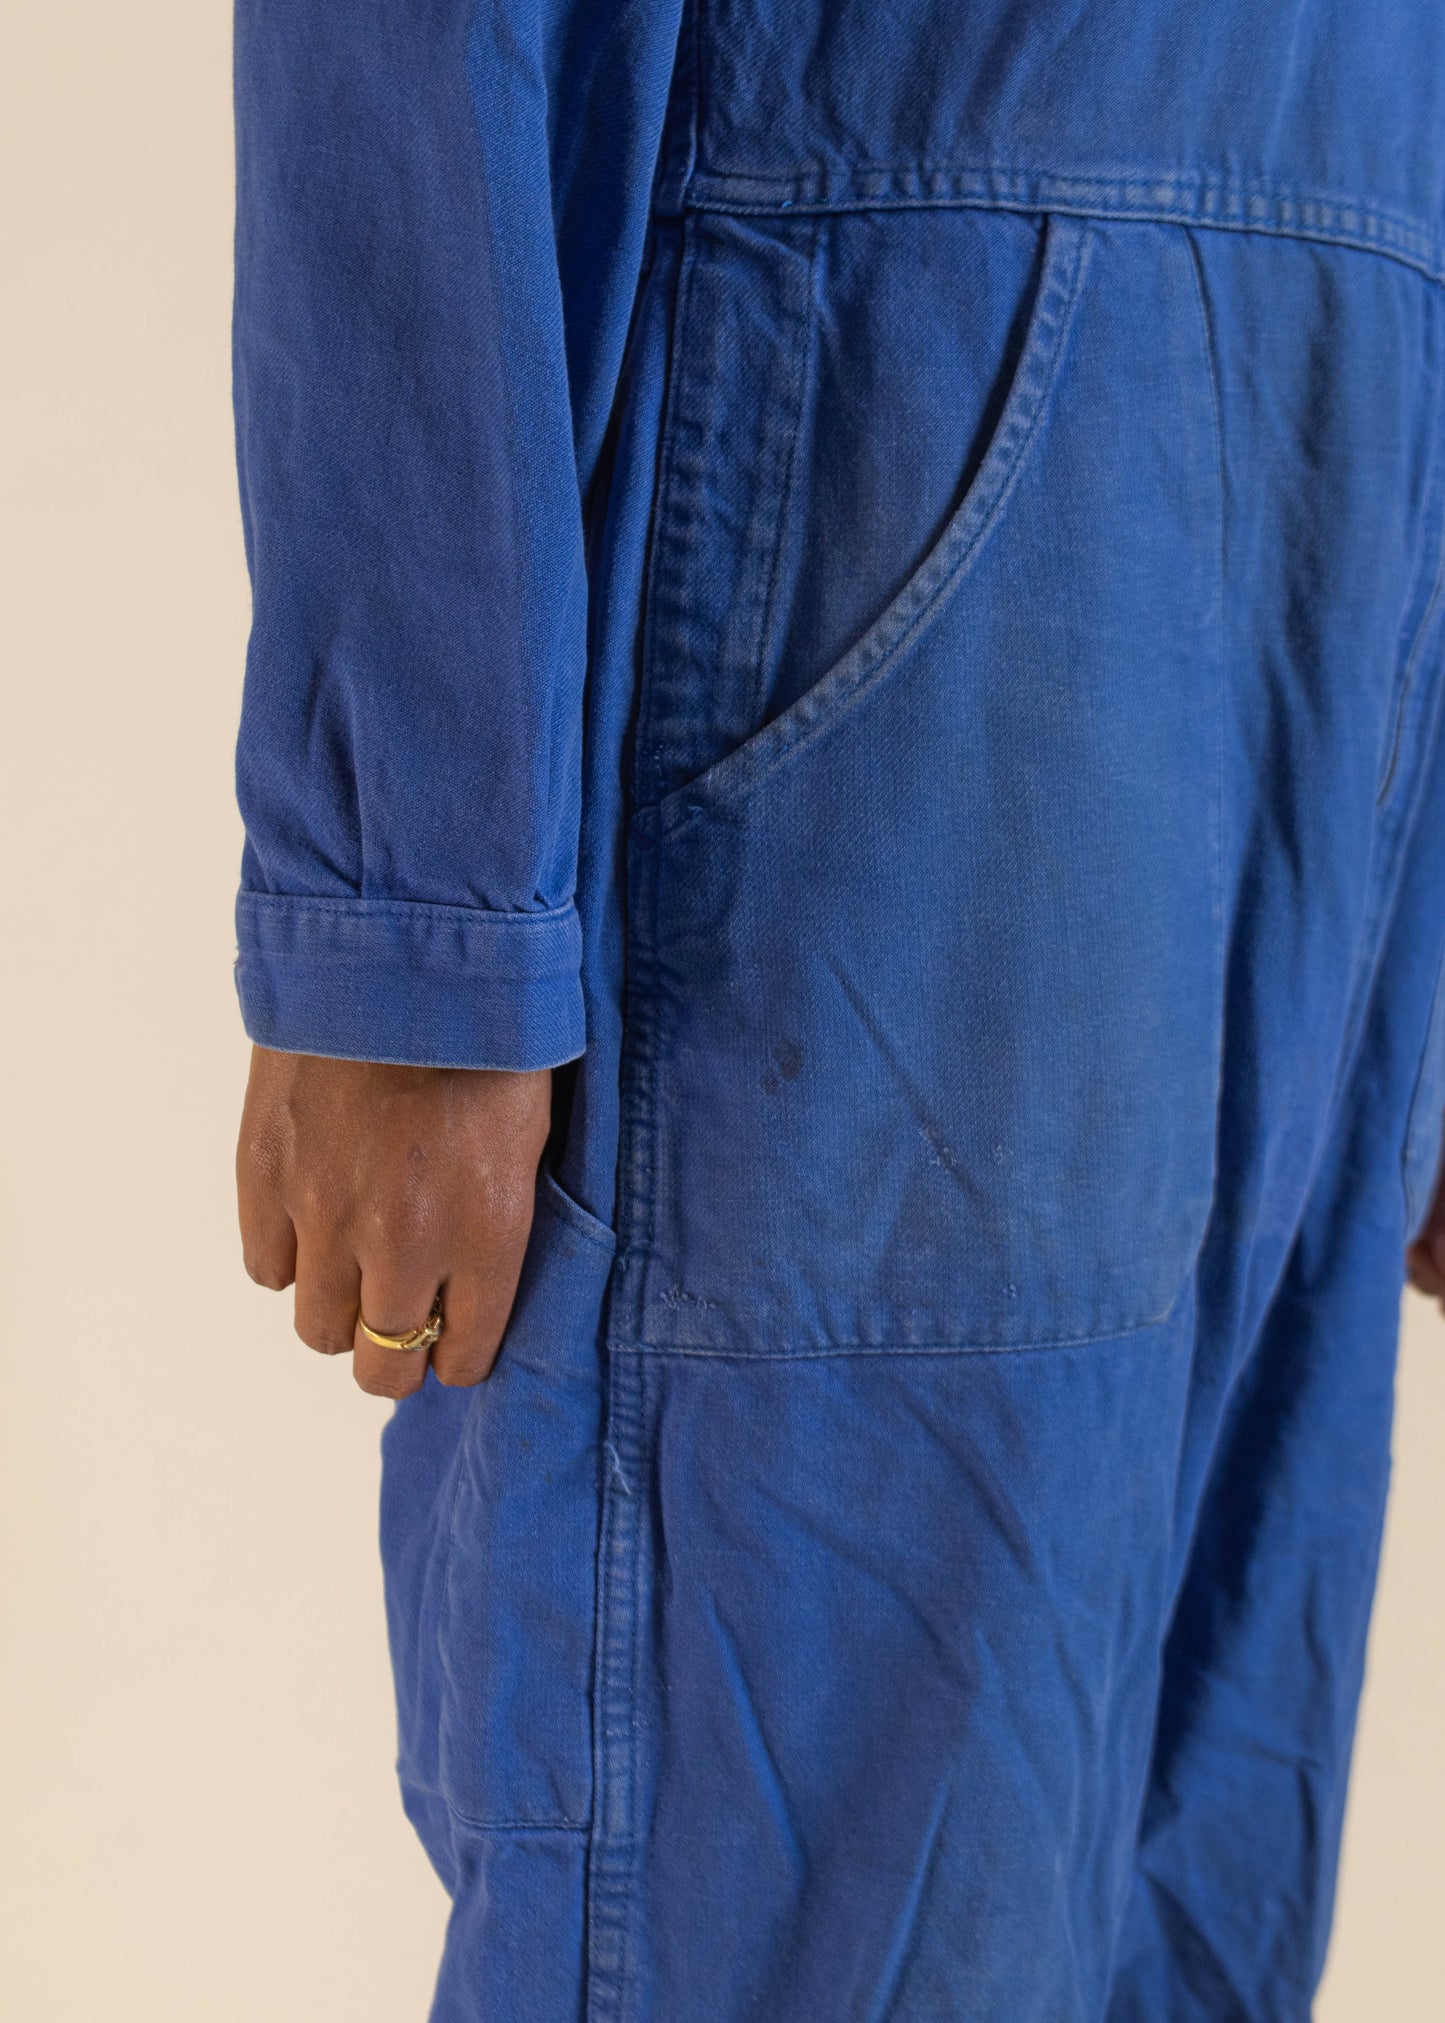 1980s French Workwear Long Sleeve Zip Up Coveralls Size M/L